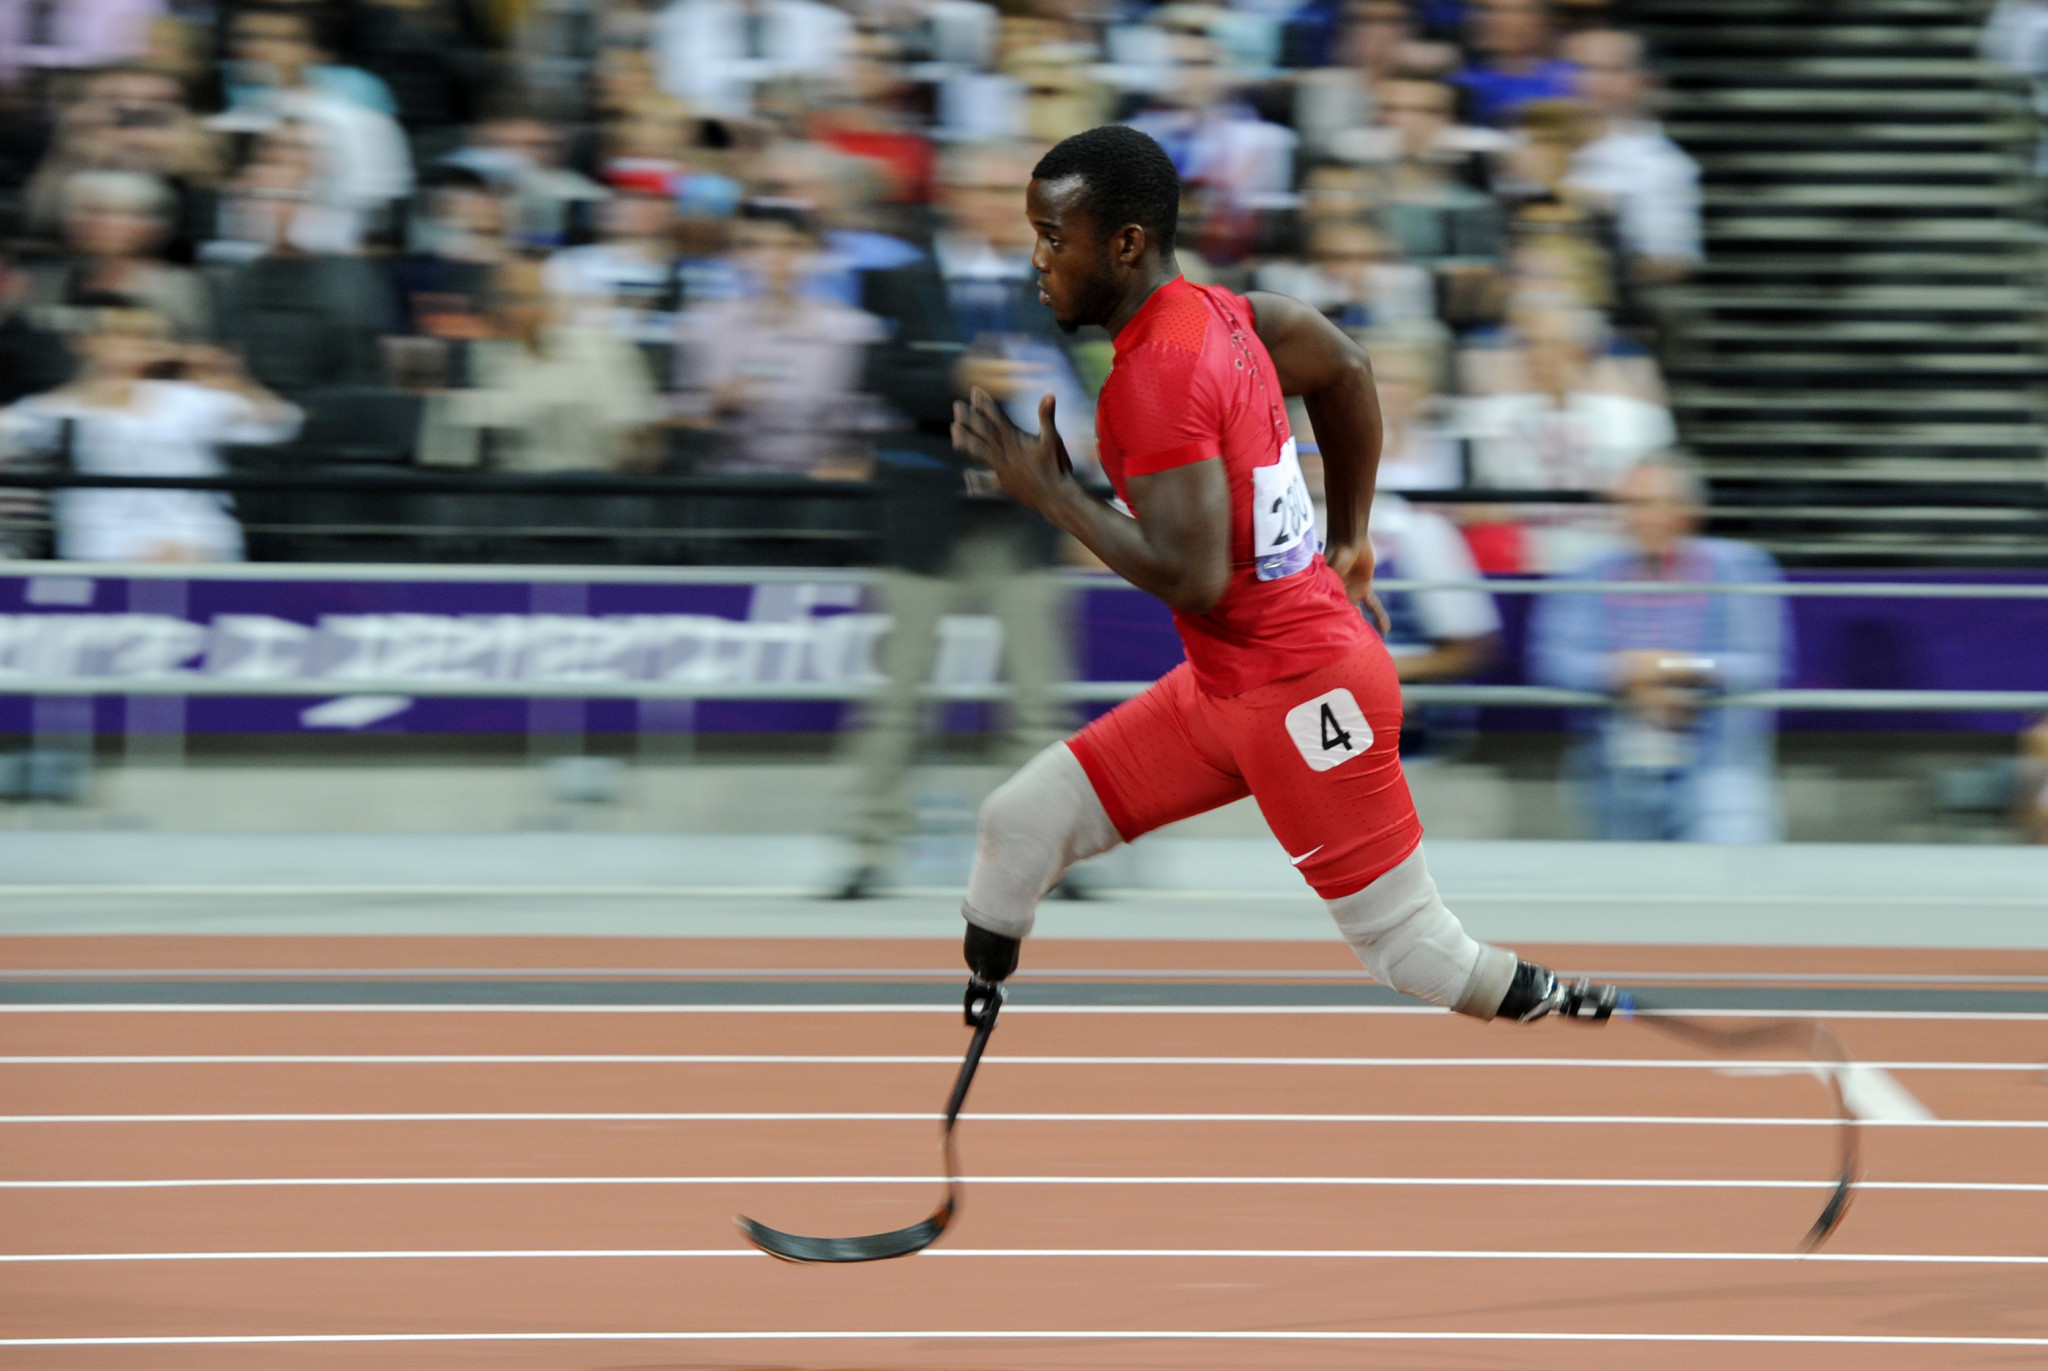 World Athletics panel rules Leeper would gain "competitive advantage" using running specific prostheses